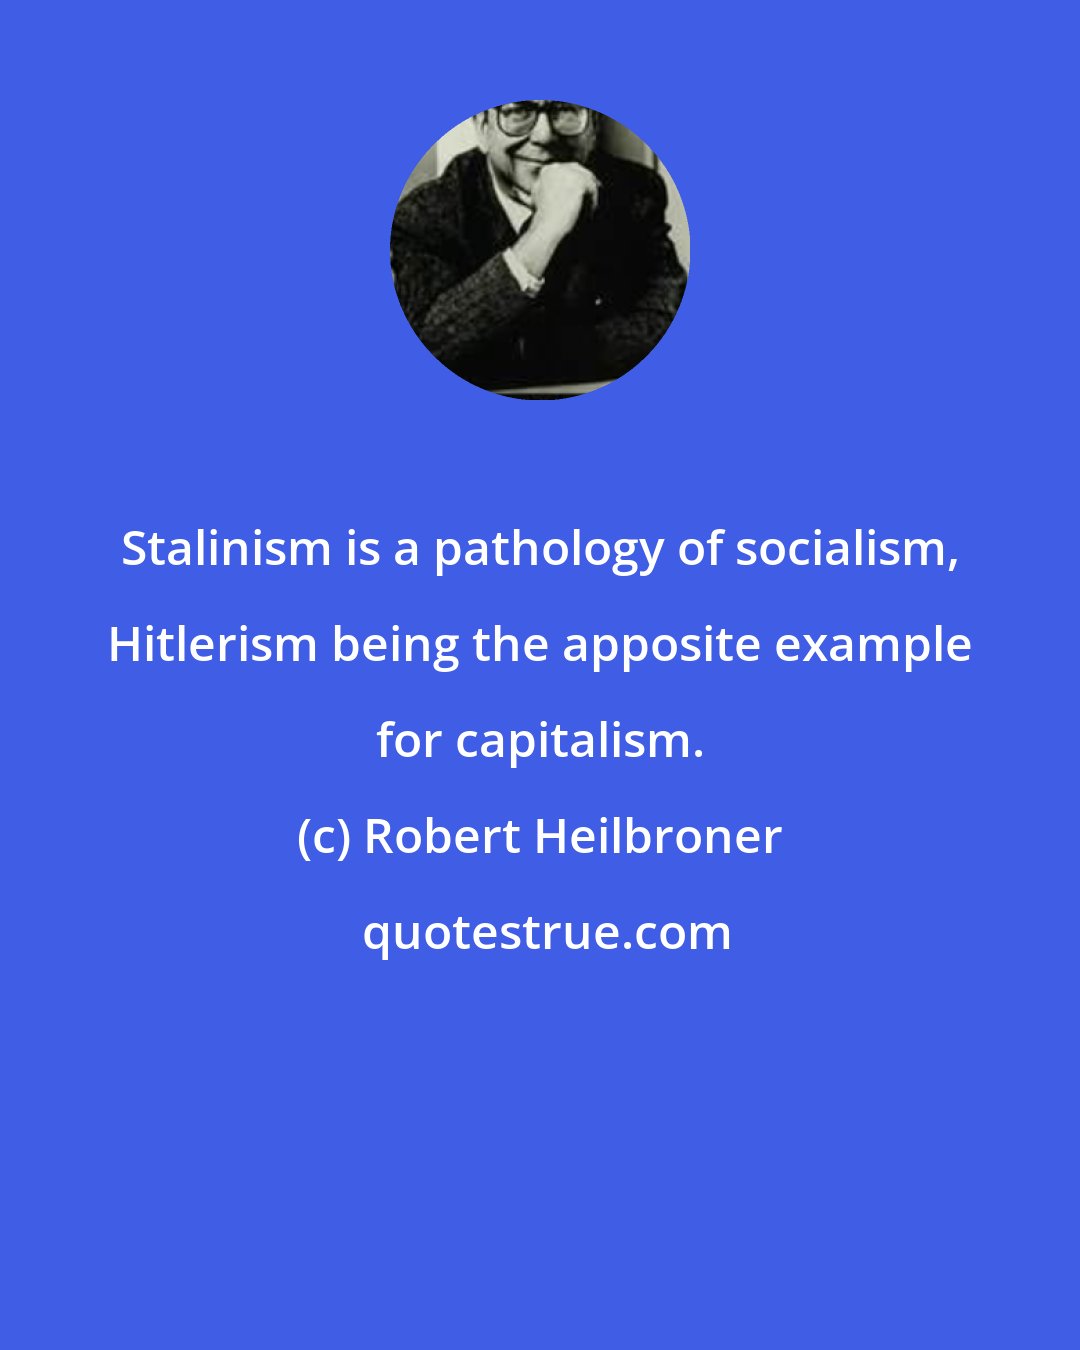 Robert Heilbroner: Stalinism is a pathology of socialism, Hitlerism being the apposite example for capitalism.